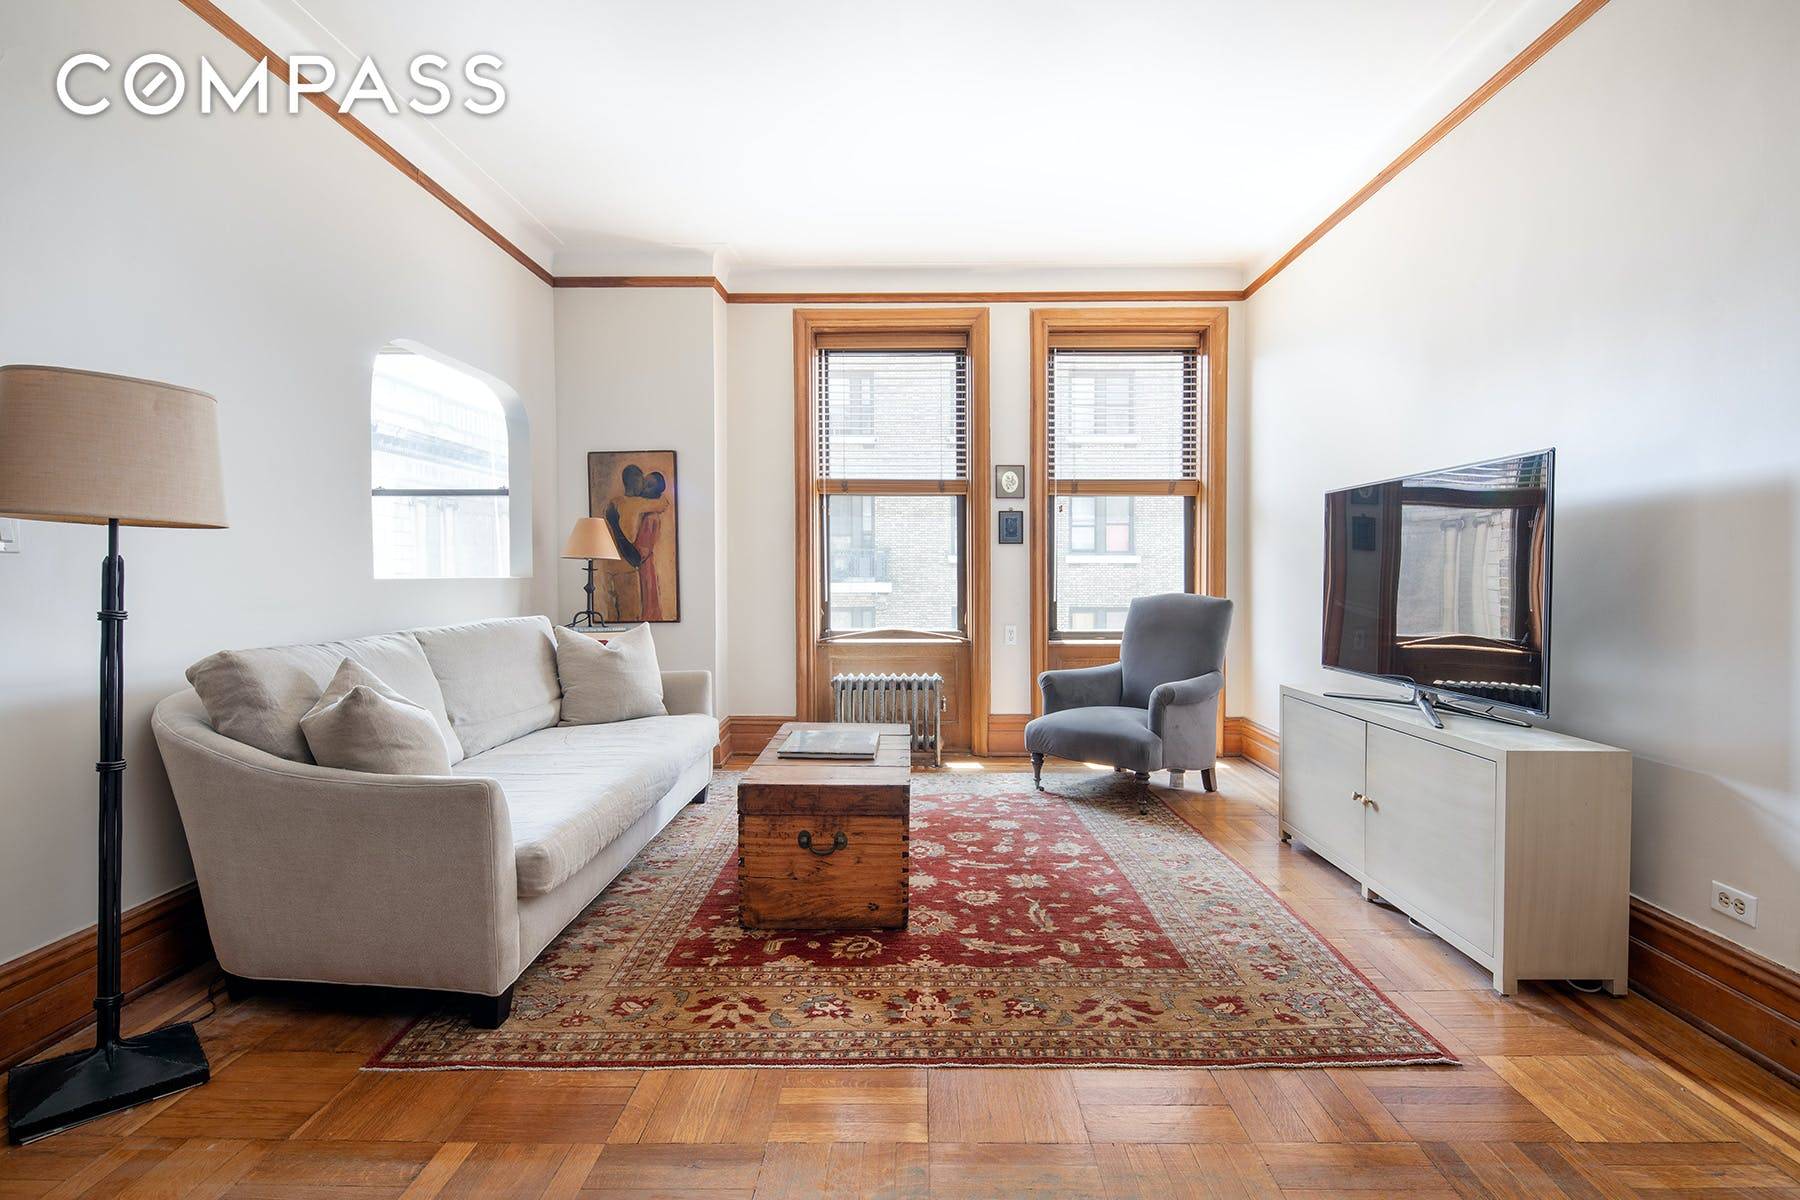 SUNNY PREWAR BEAUTY IN WASHINGTON HEIGHTS HISTORIC AUDUBON PARK DISTRICT Sun drenched, lofty, beautiful prewar one bedroom with patrial river views.